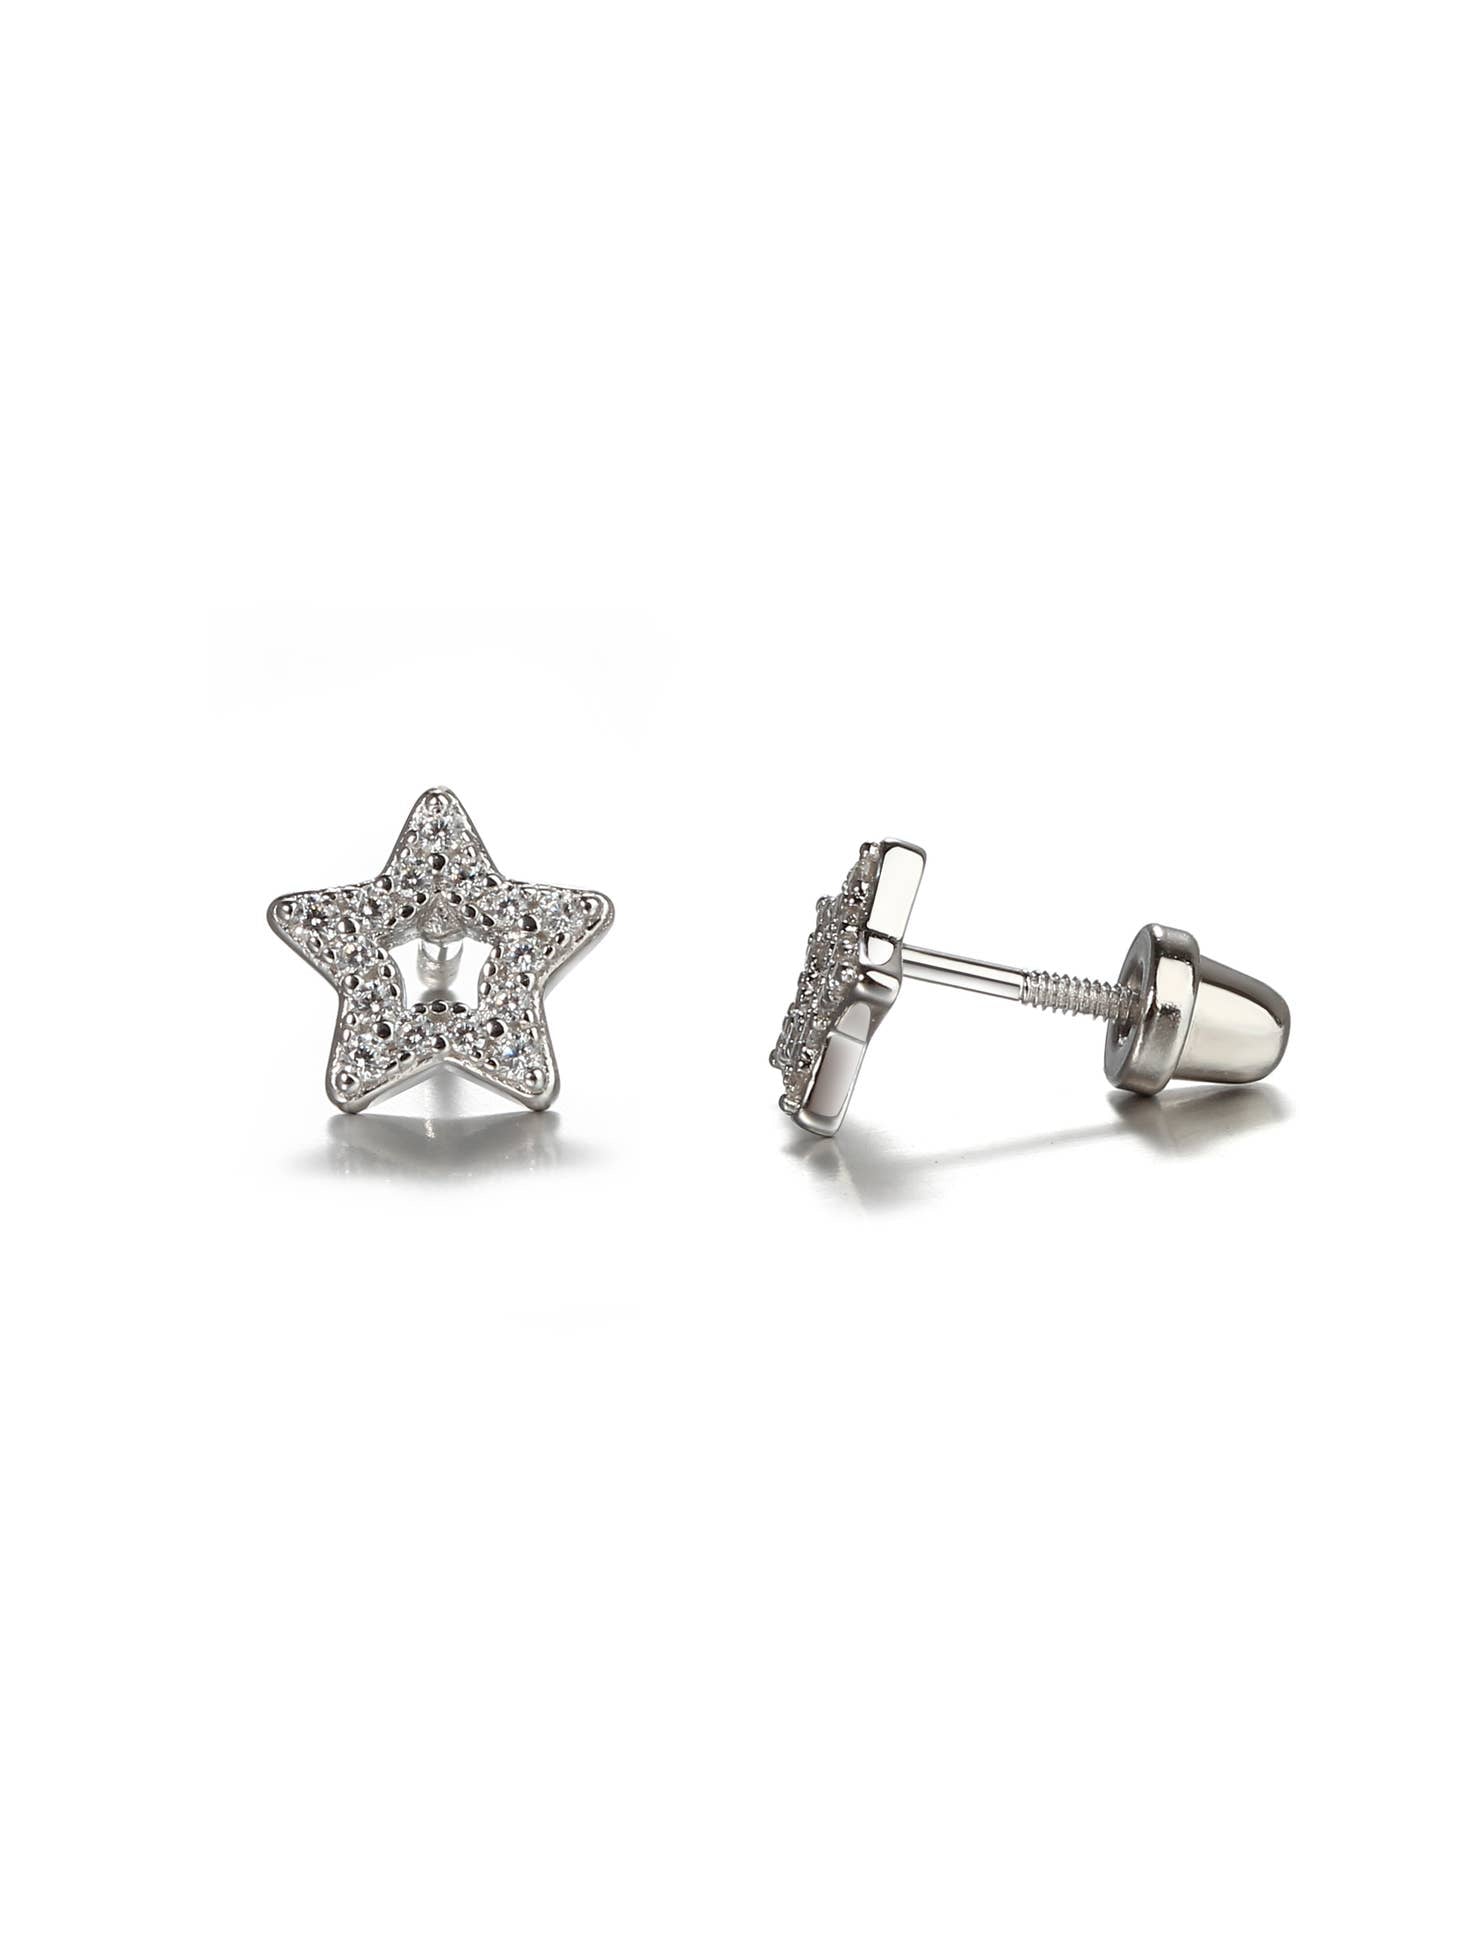 sterling silver star screw back earrings with cubic zirconia